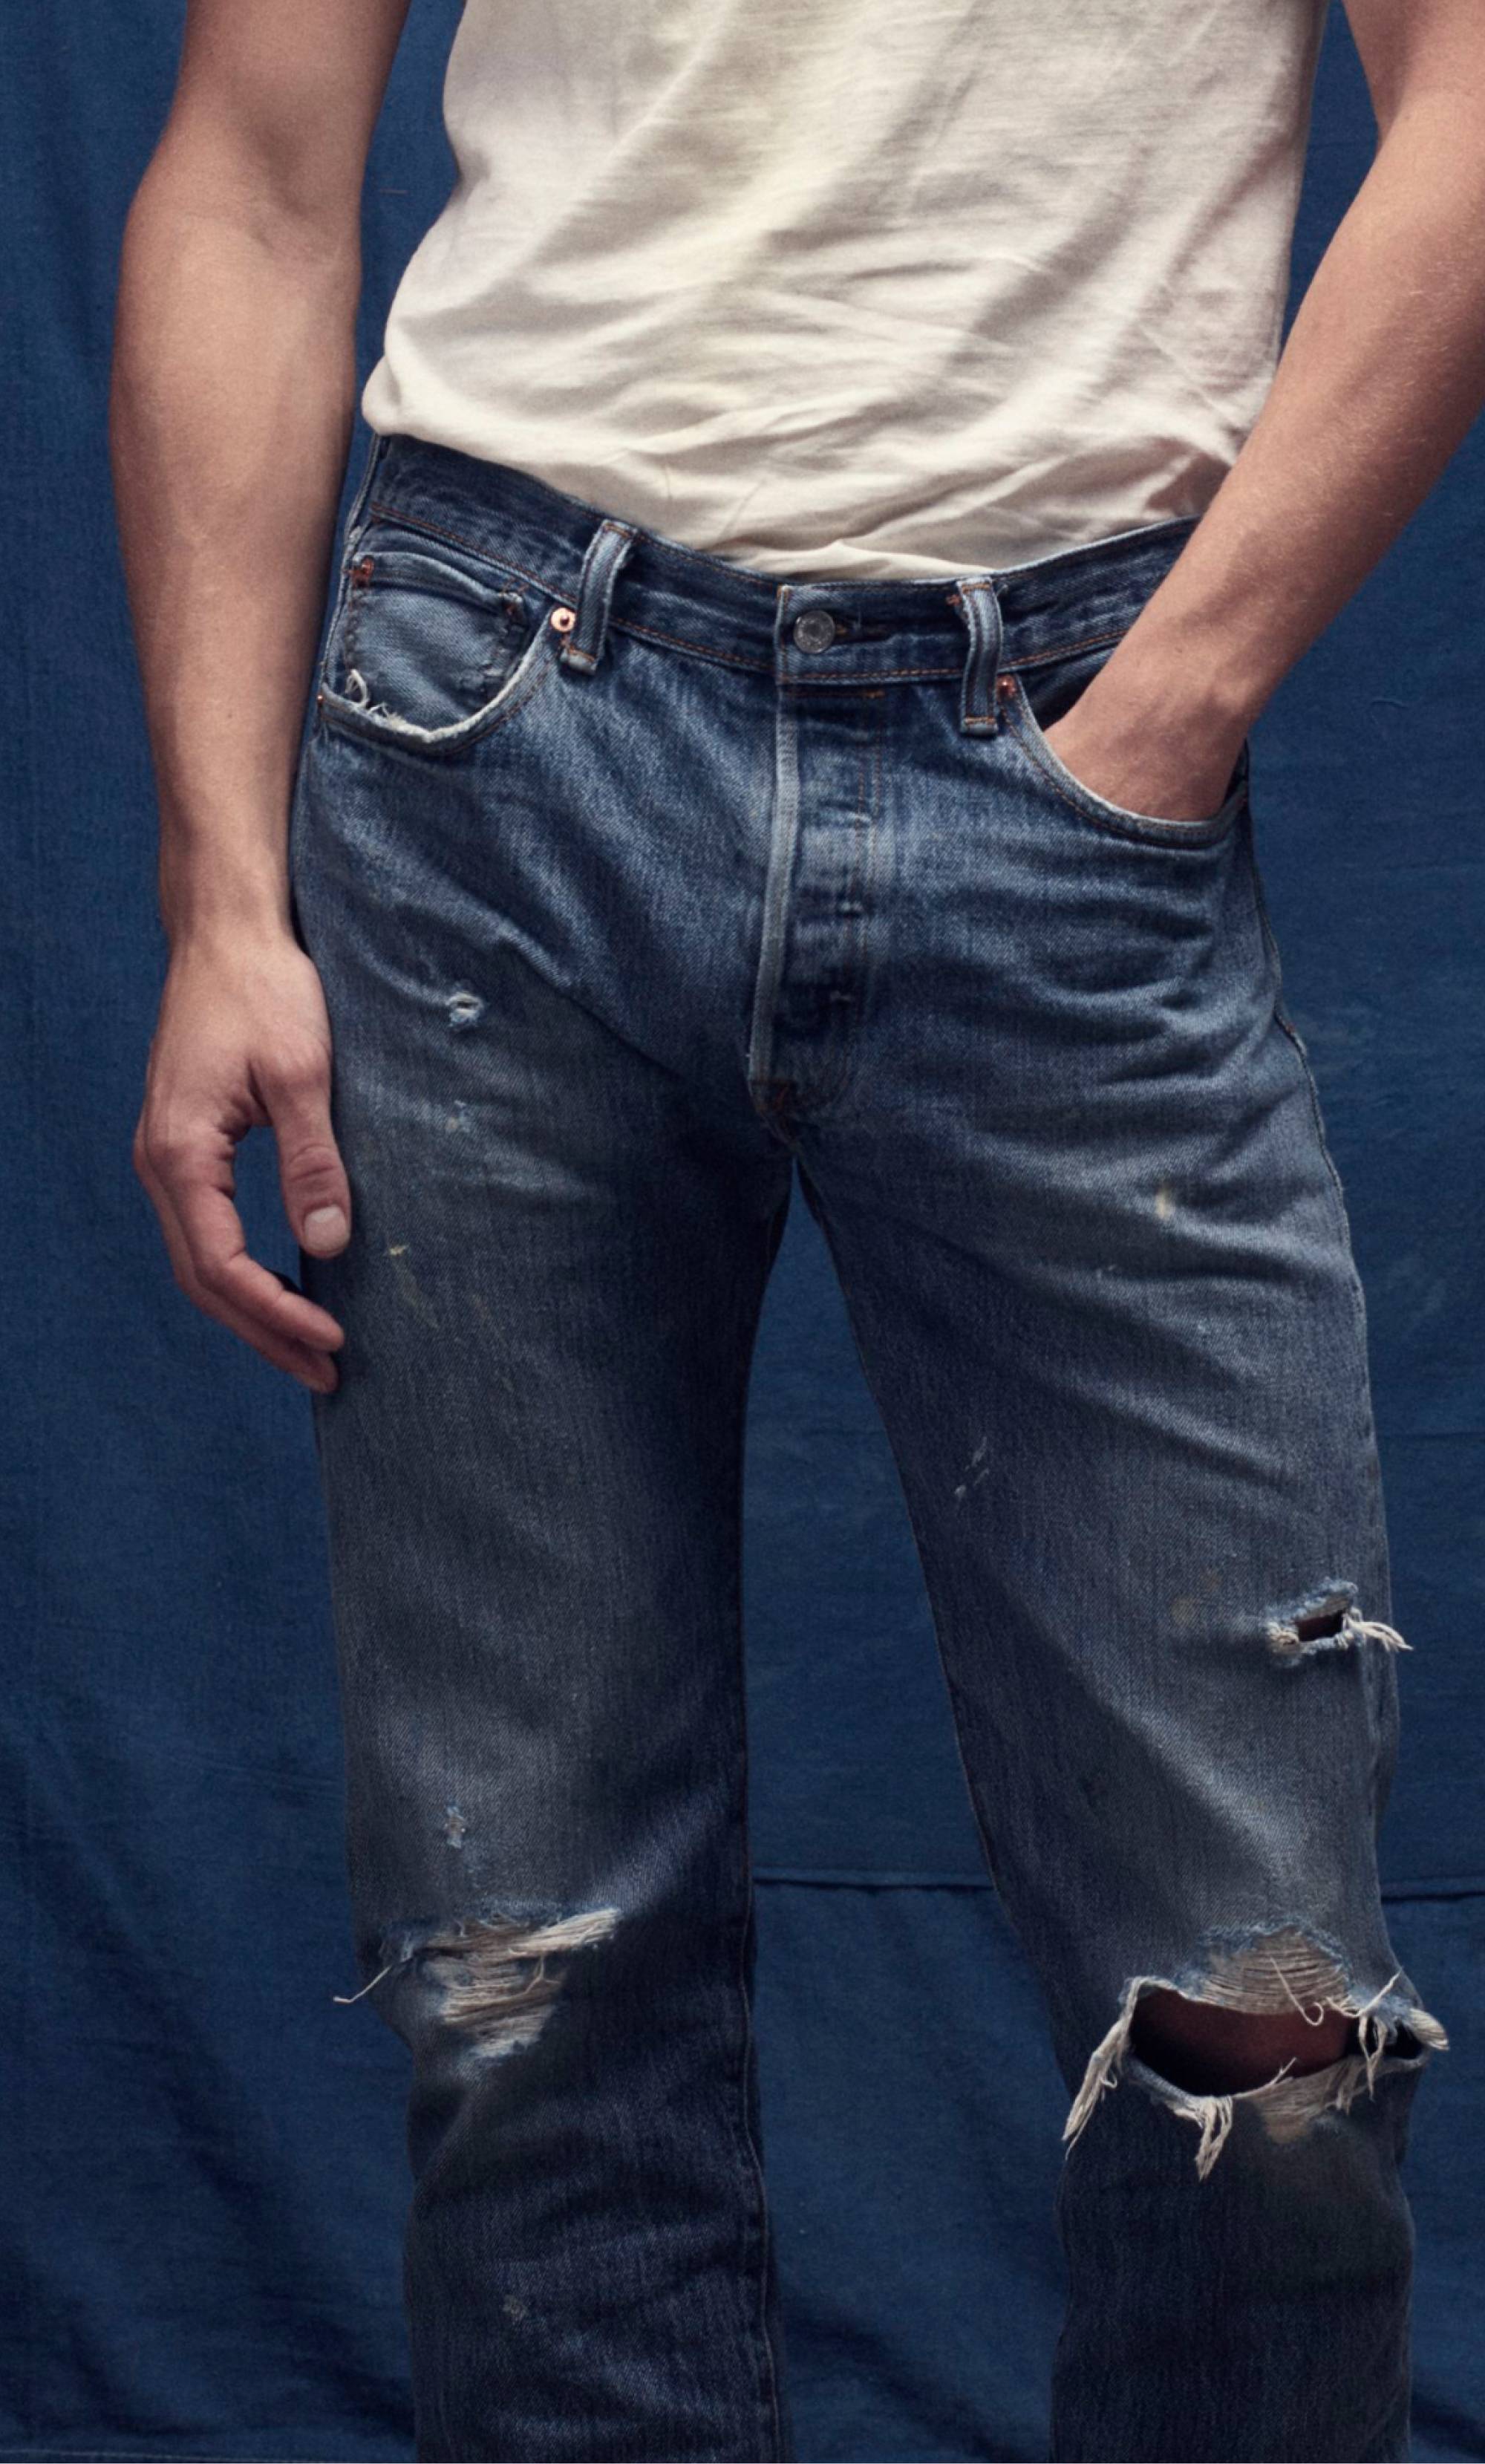 Man in jeans with hand in pocket